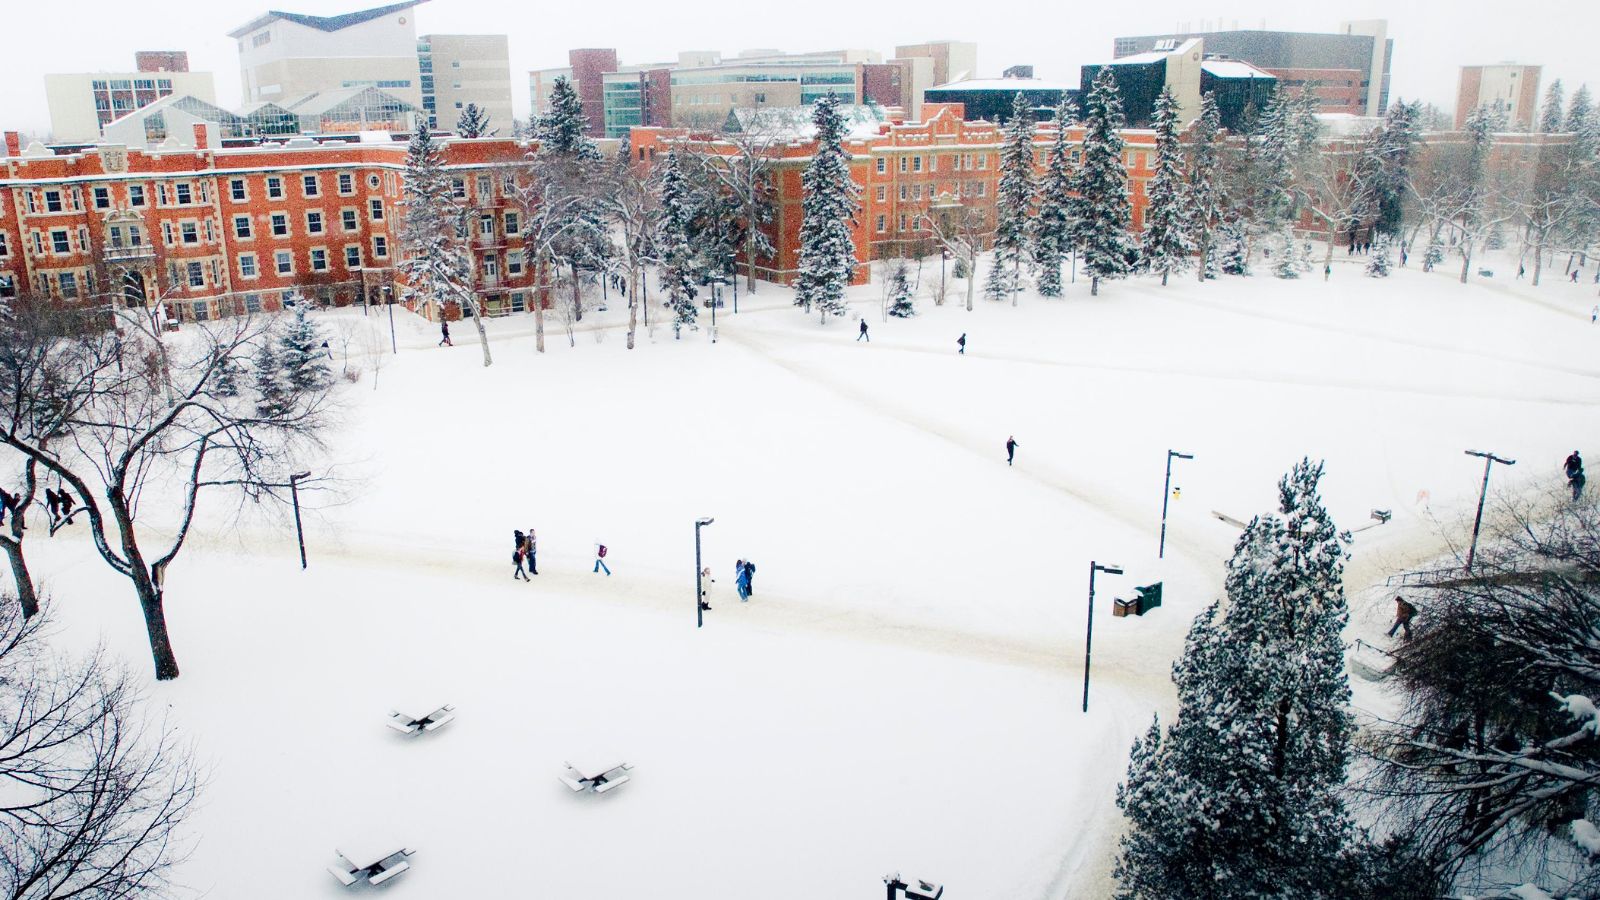 The U of A quad in winter time